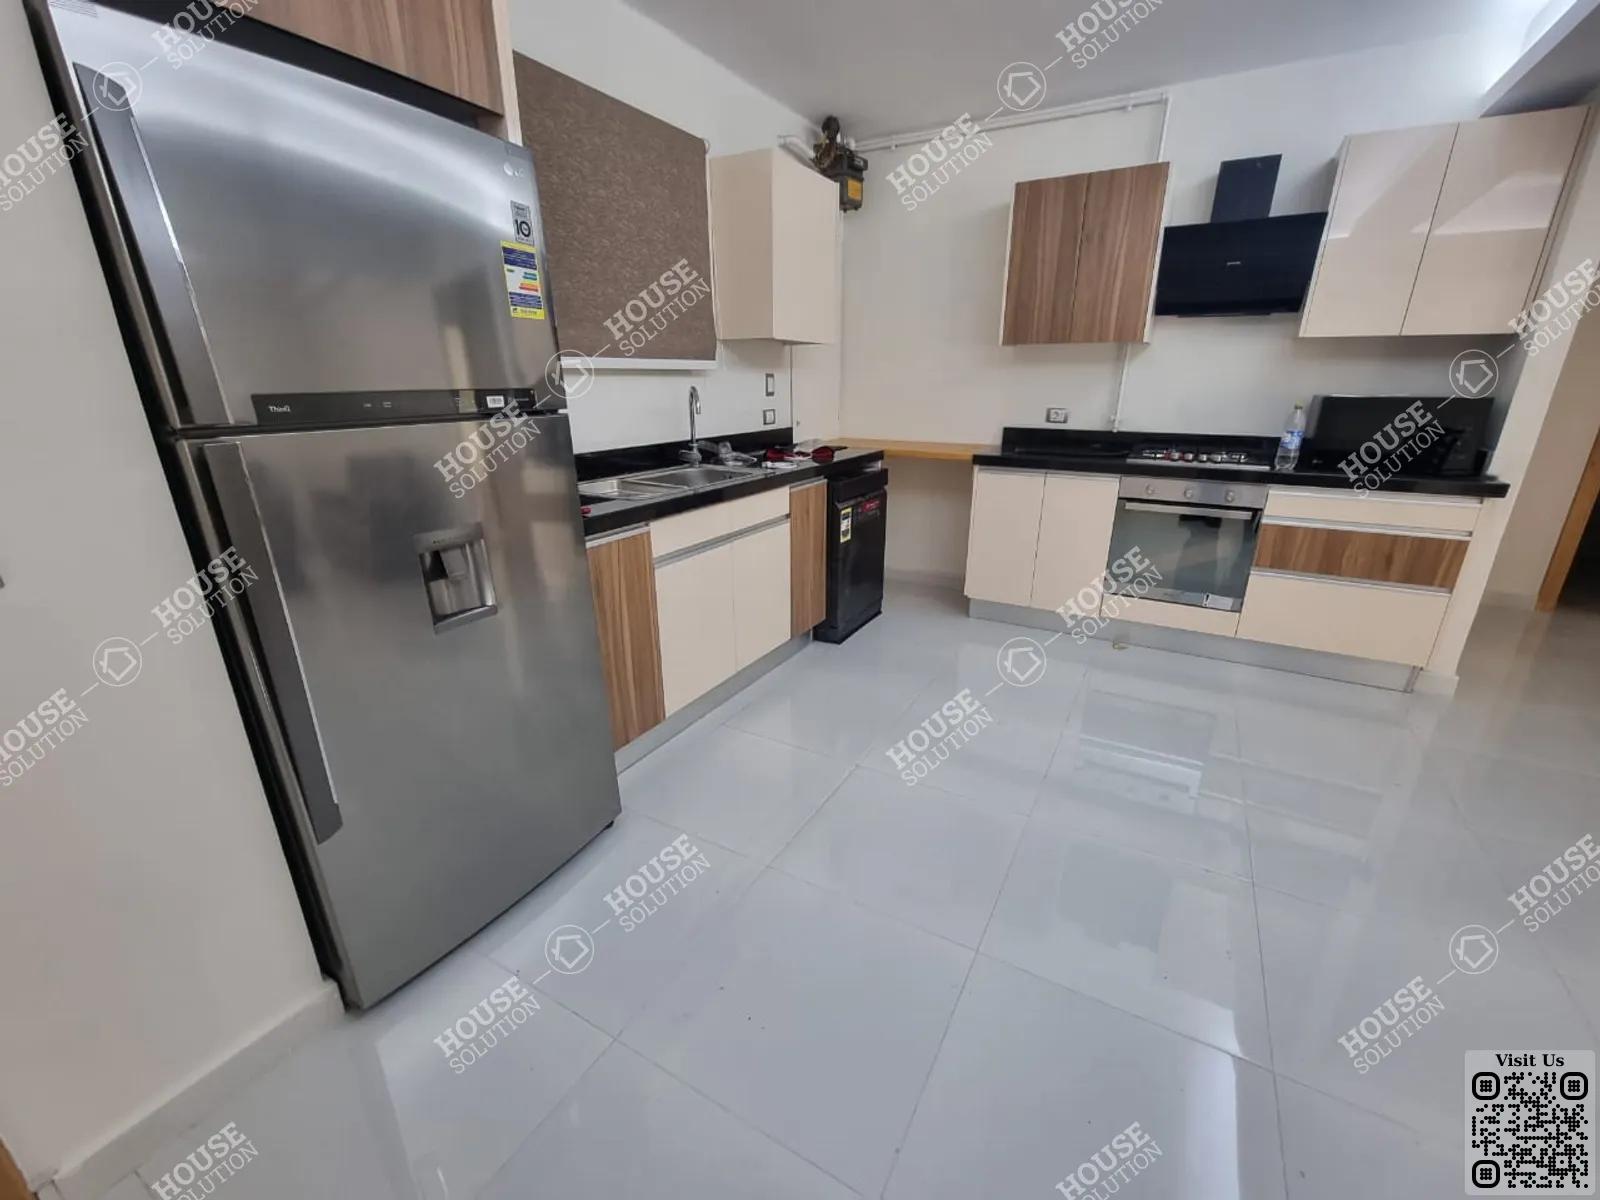 KITCHEN  @ Apartments For Rent In Maadi Maadi Sarayat Area: 145 m² consists of 2 Bedrooms 2 Bathrooms Modern furnished 5 stars #5758-1